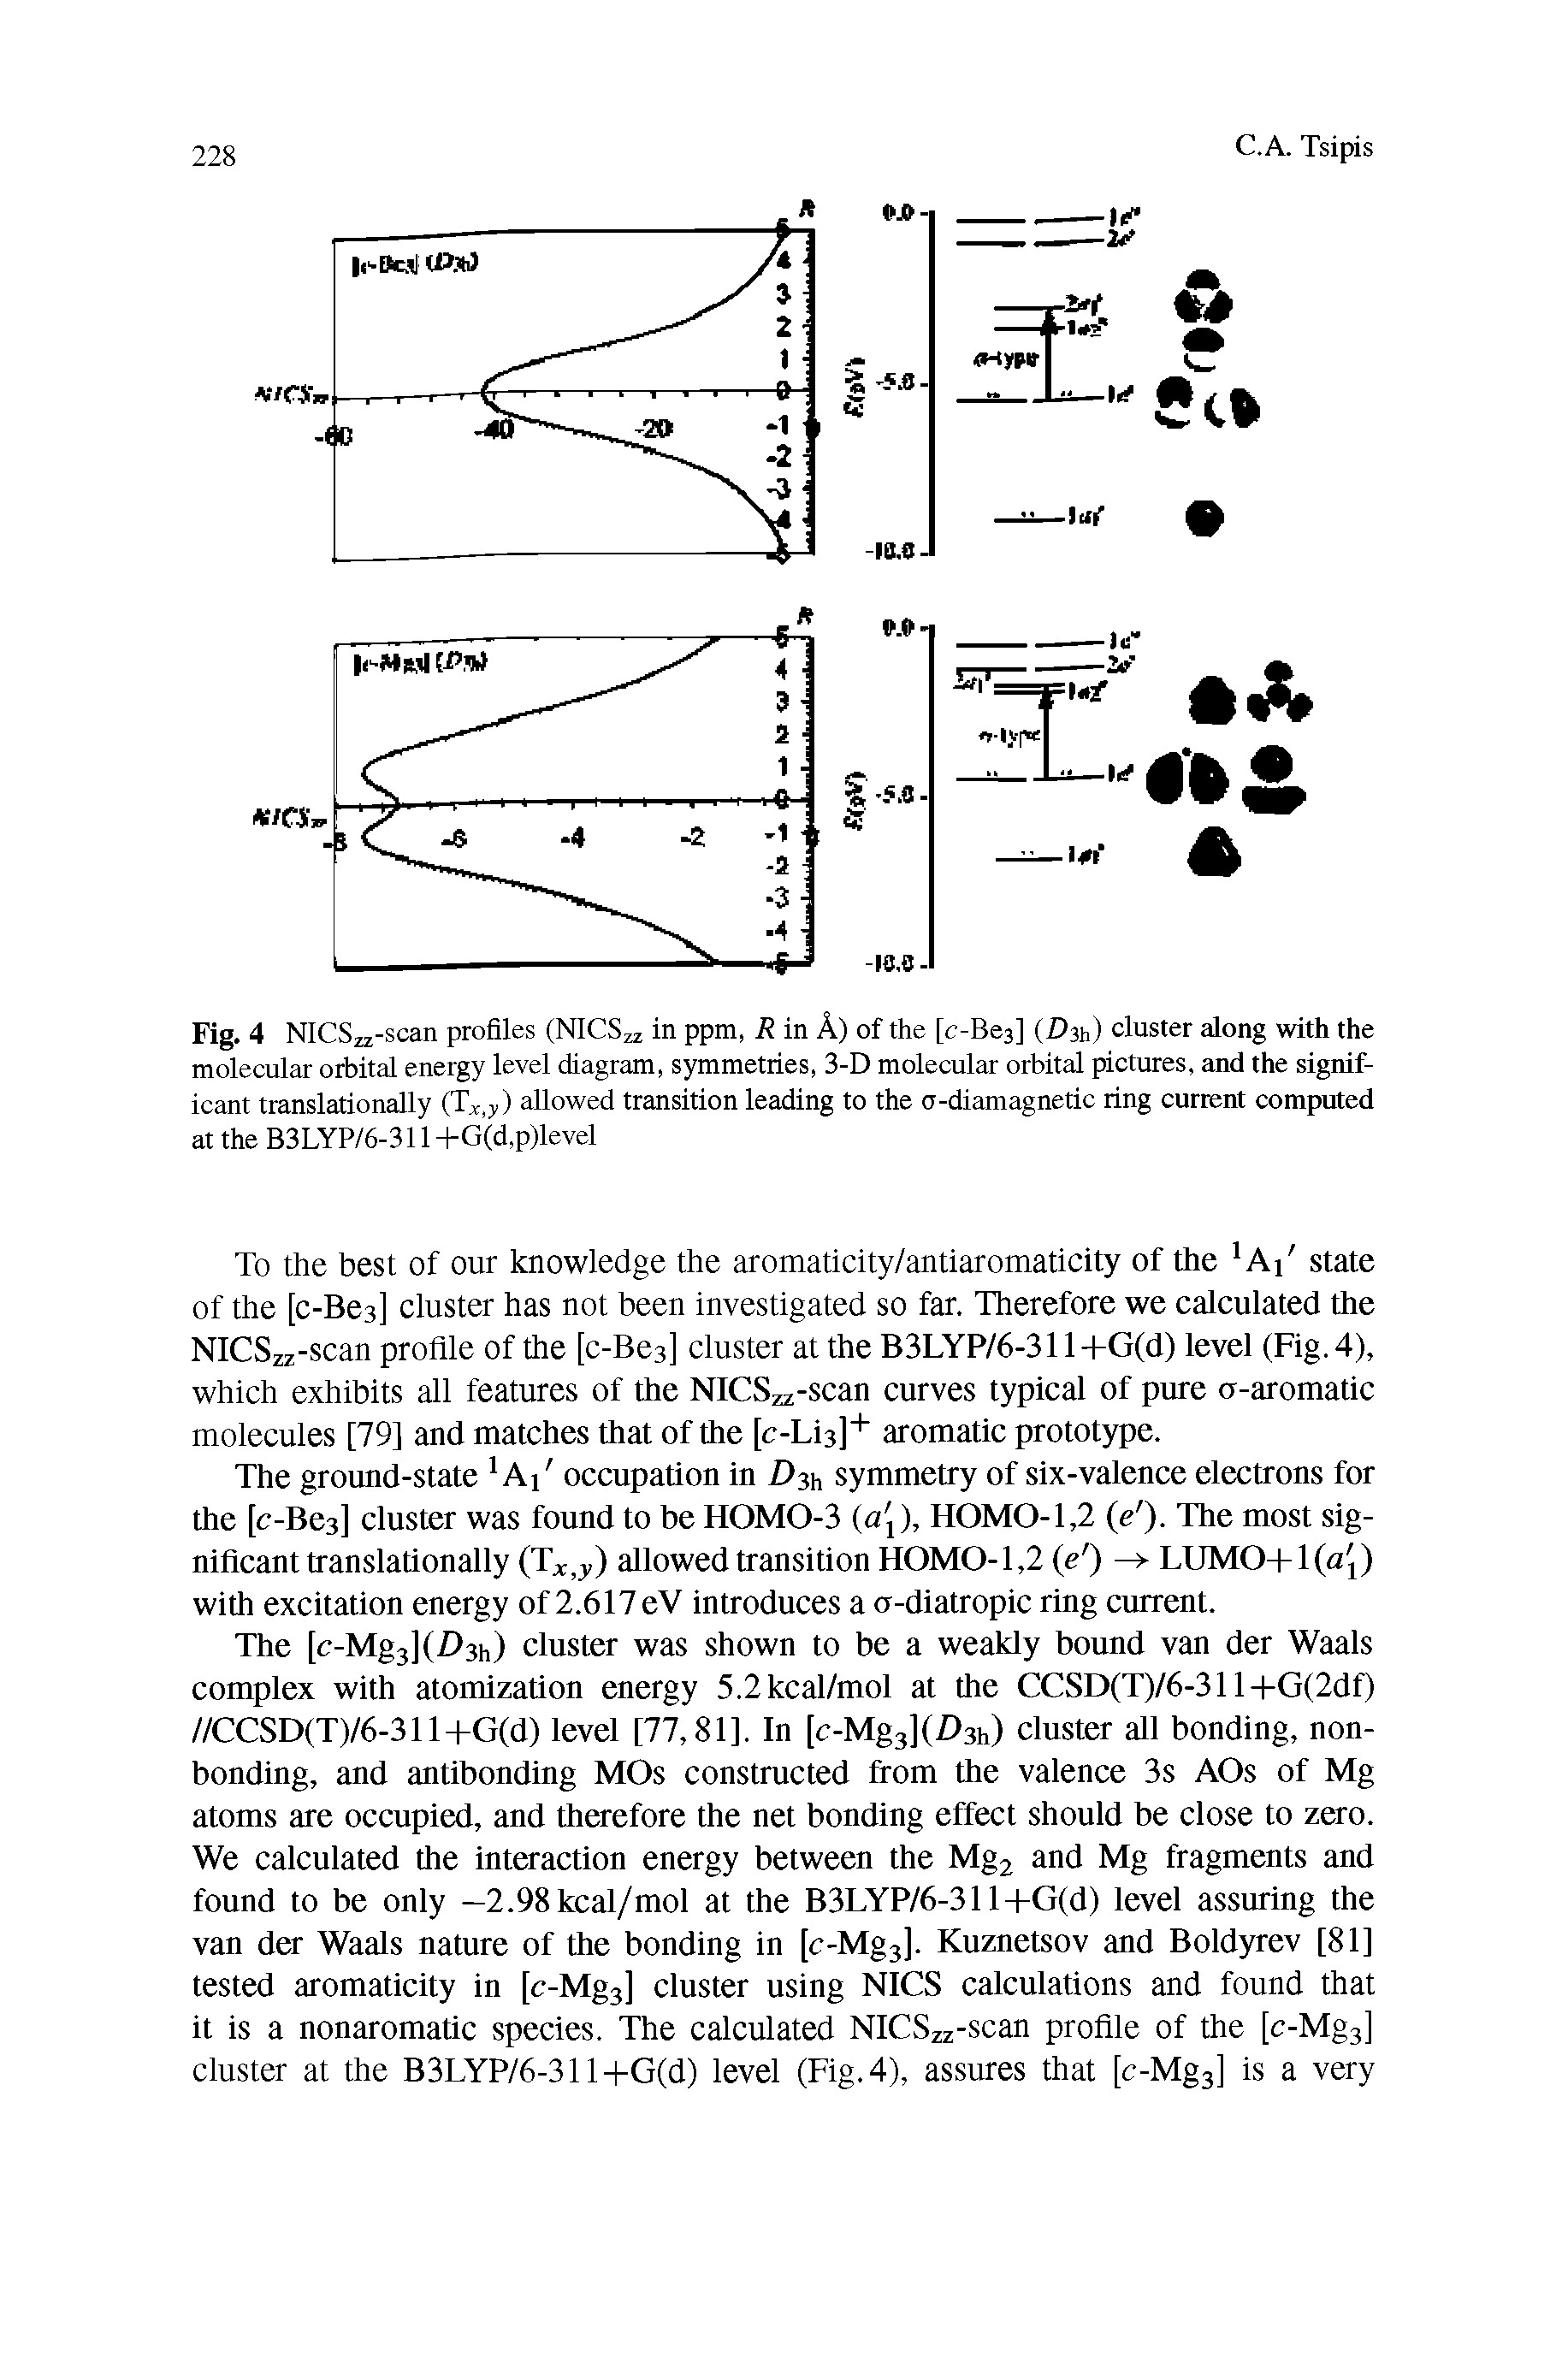 Fig. 4 NICSzz-scan profiles (NICS z in ppm, R in A) of the [c-Bea] (Dsh) cluster along with the molecular orbital energy level diagram, symmetries, 3-D molecular orbital pictures, and the significant translationally (T c,j,) allowed transition leading to the a-diamagnetic ting current computed at the B3LYP/6-311 +G(d,p)level...